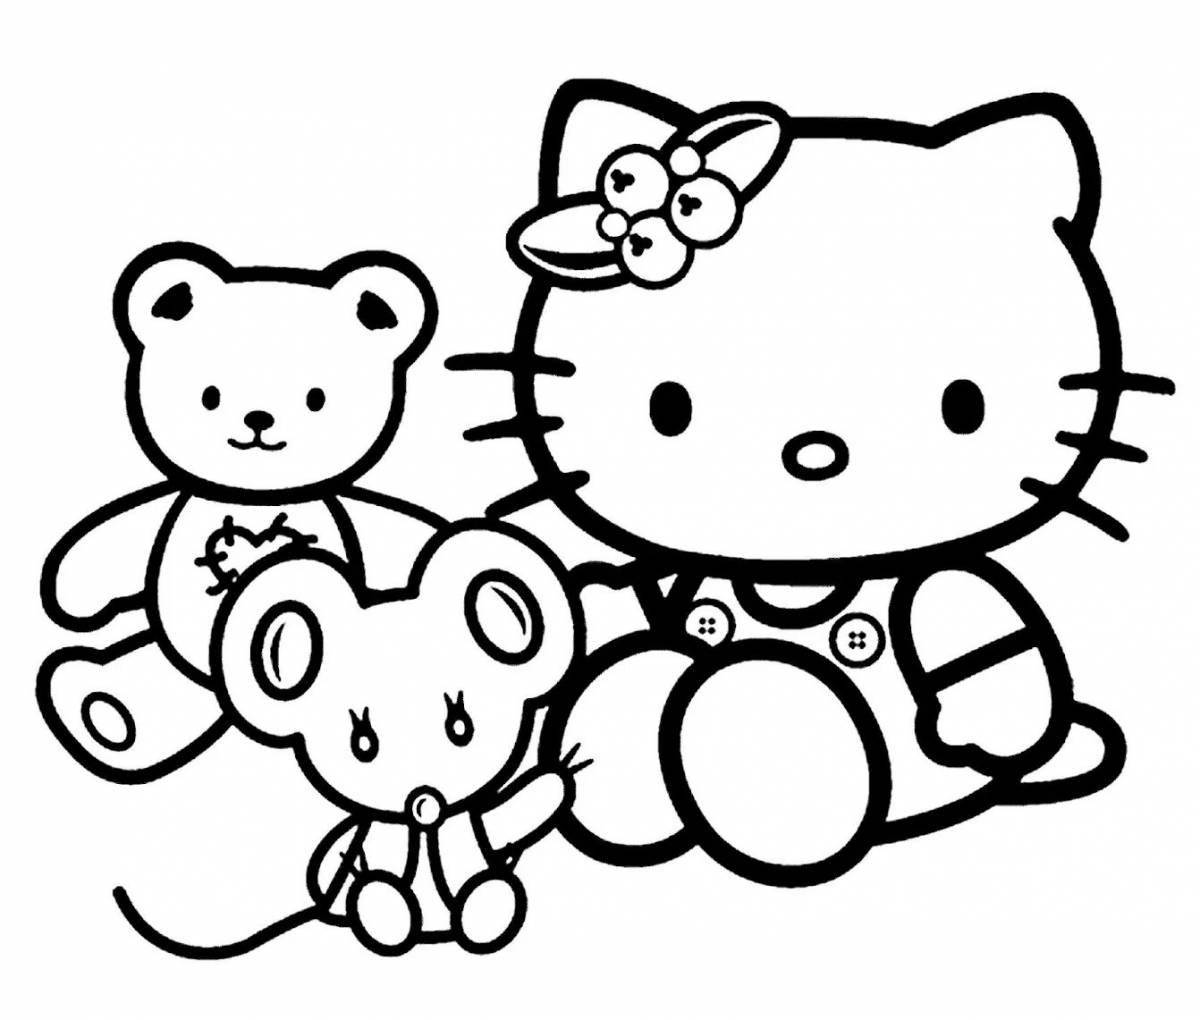 Colorific hello kitty and her friends coloring page